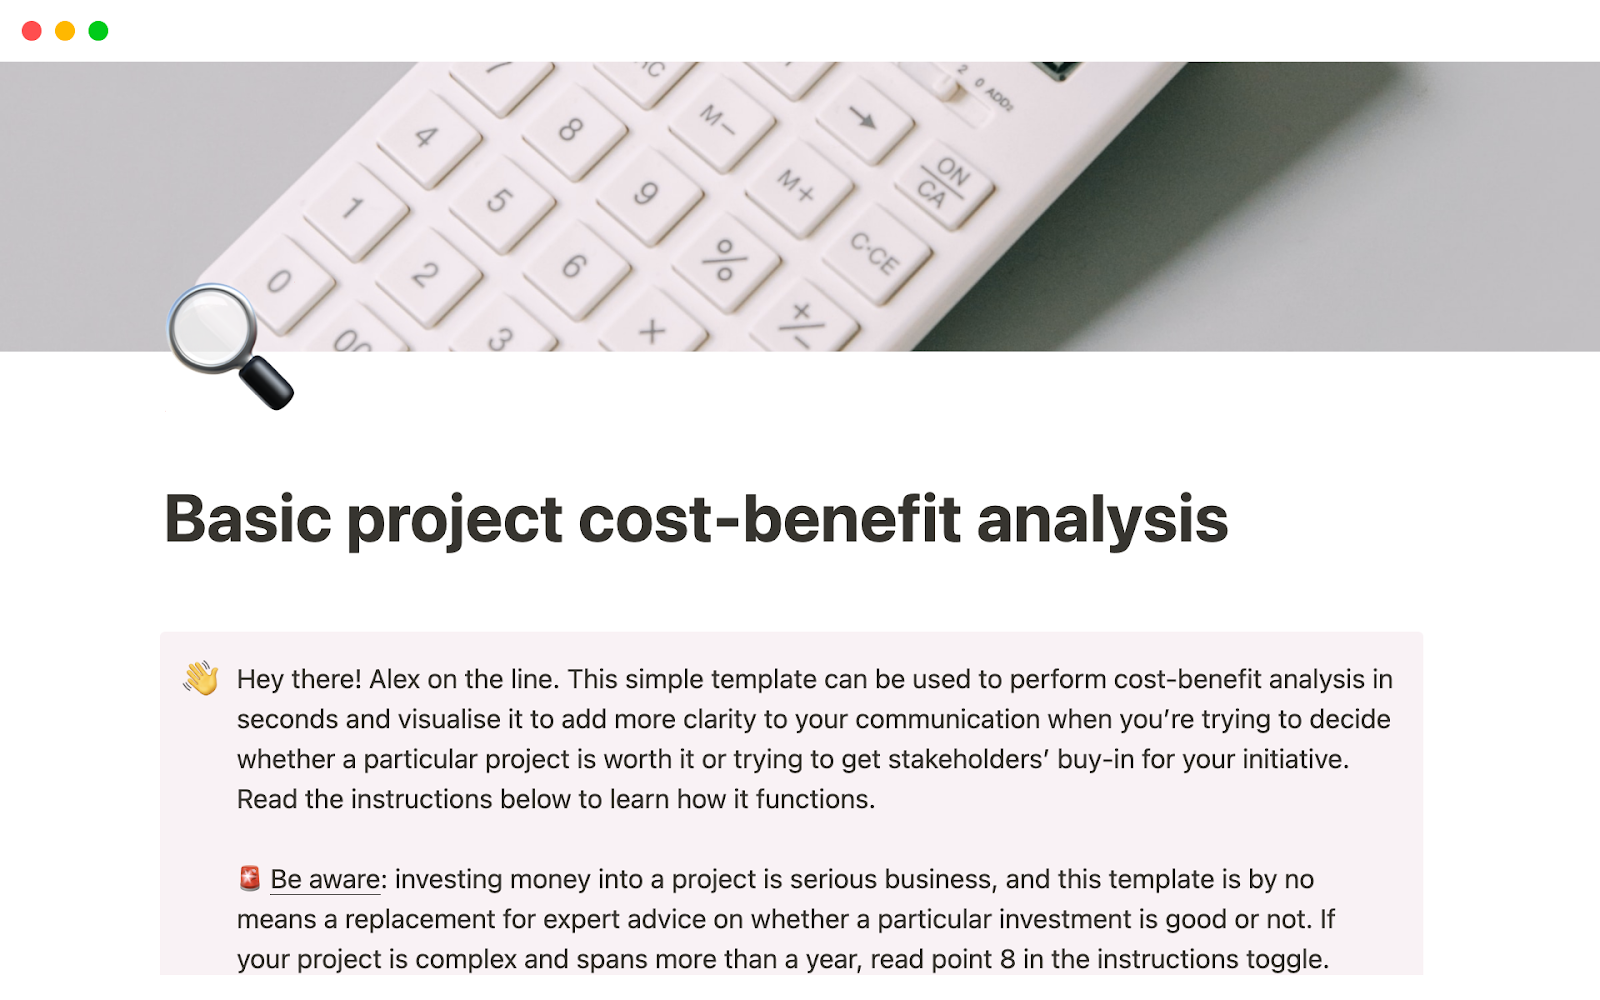 The Notion cost-benefit analysis template